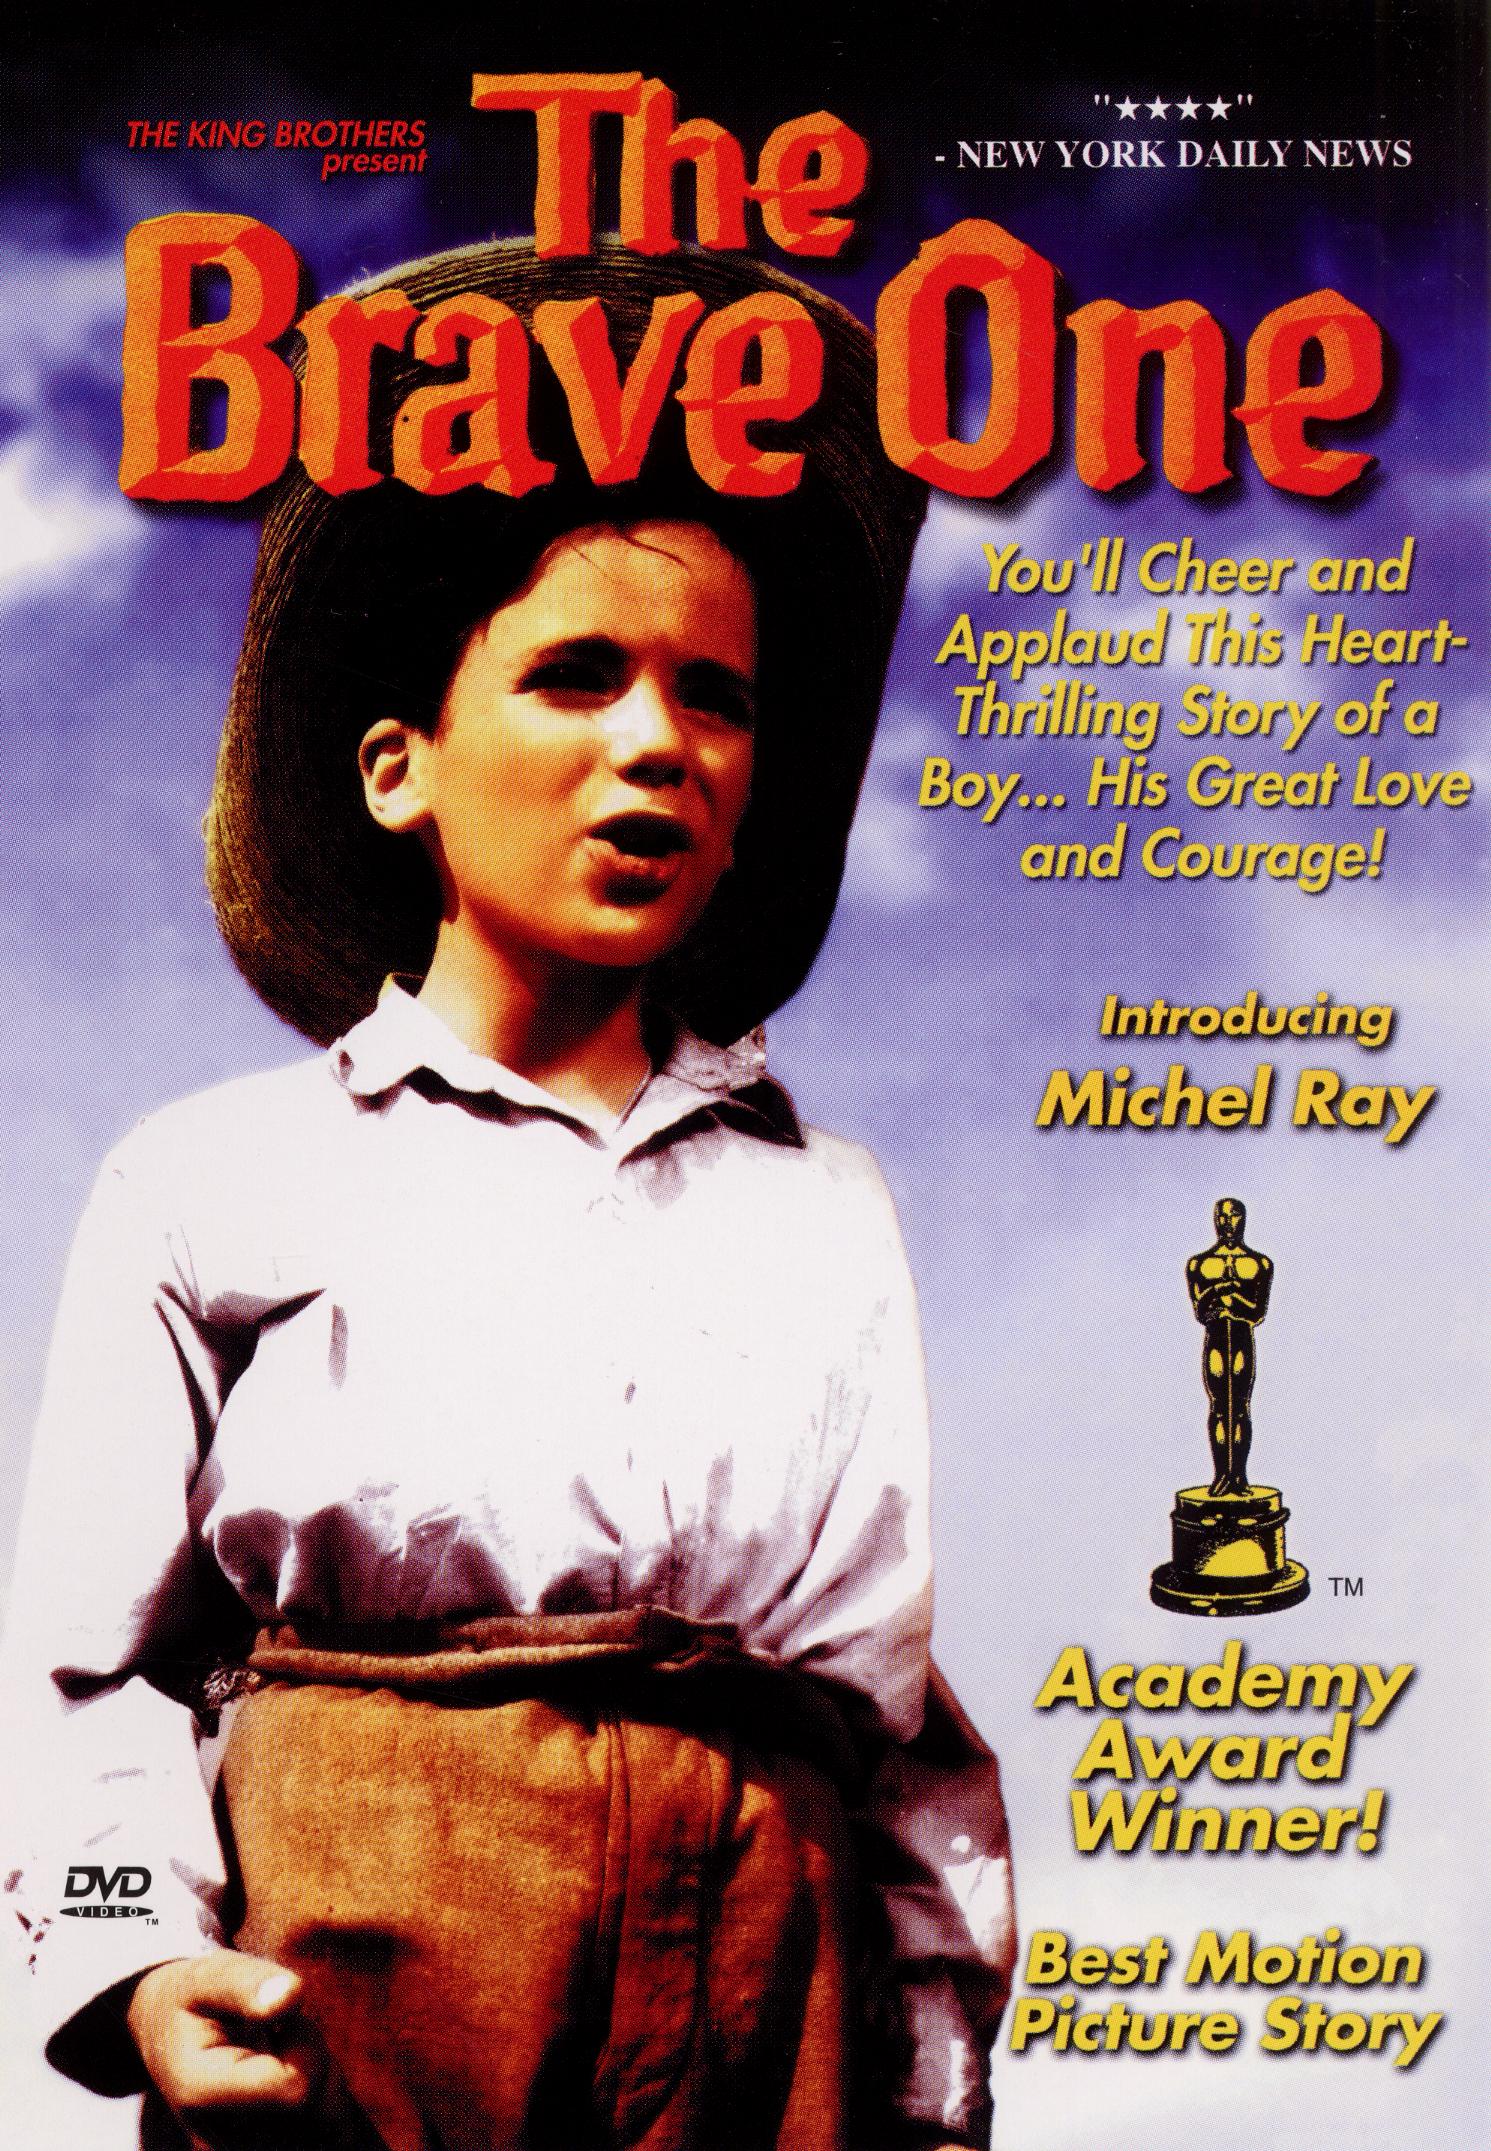 The Brave One [Blu-ray] [1956] - Best Buy